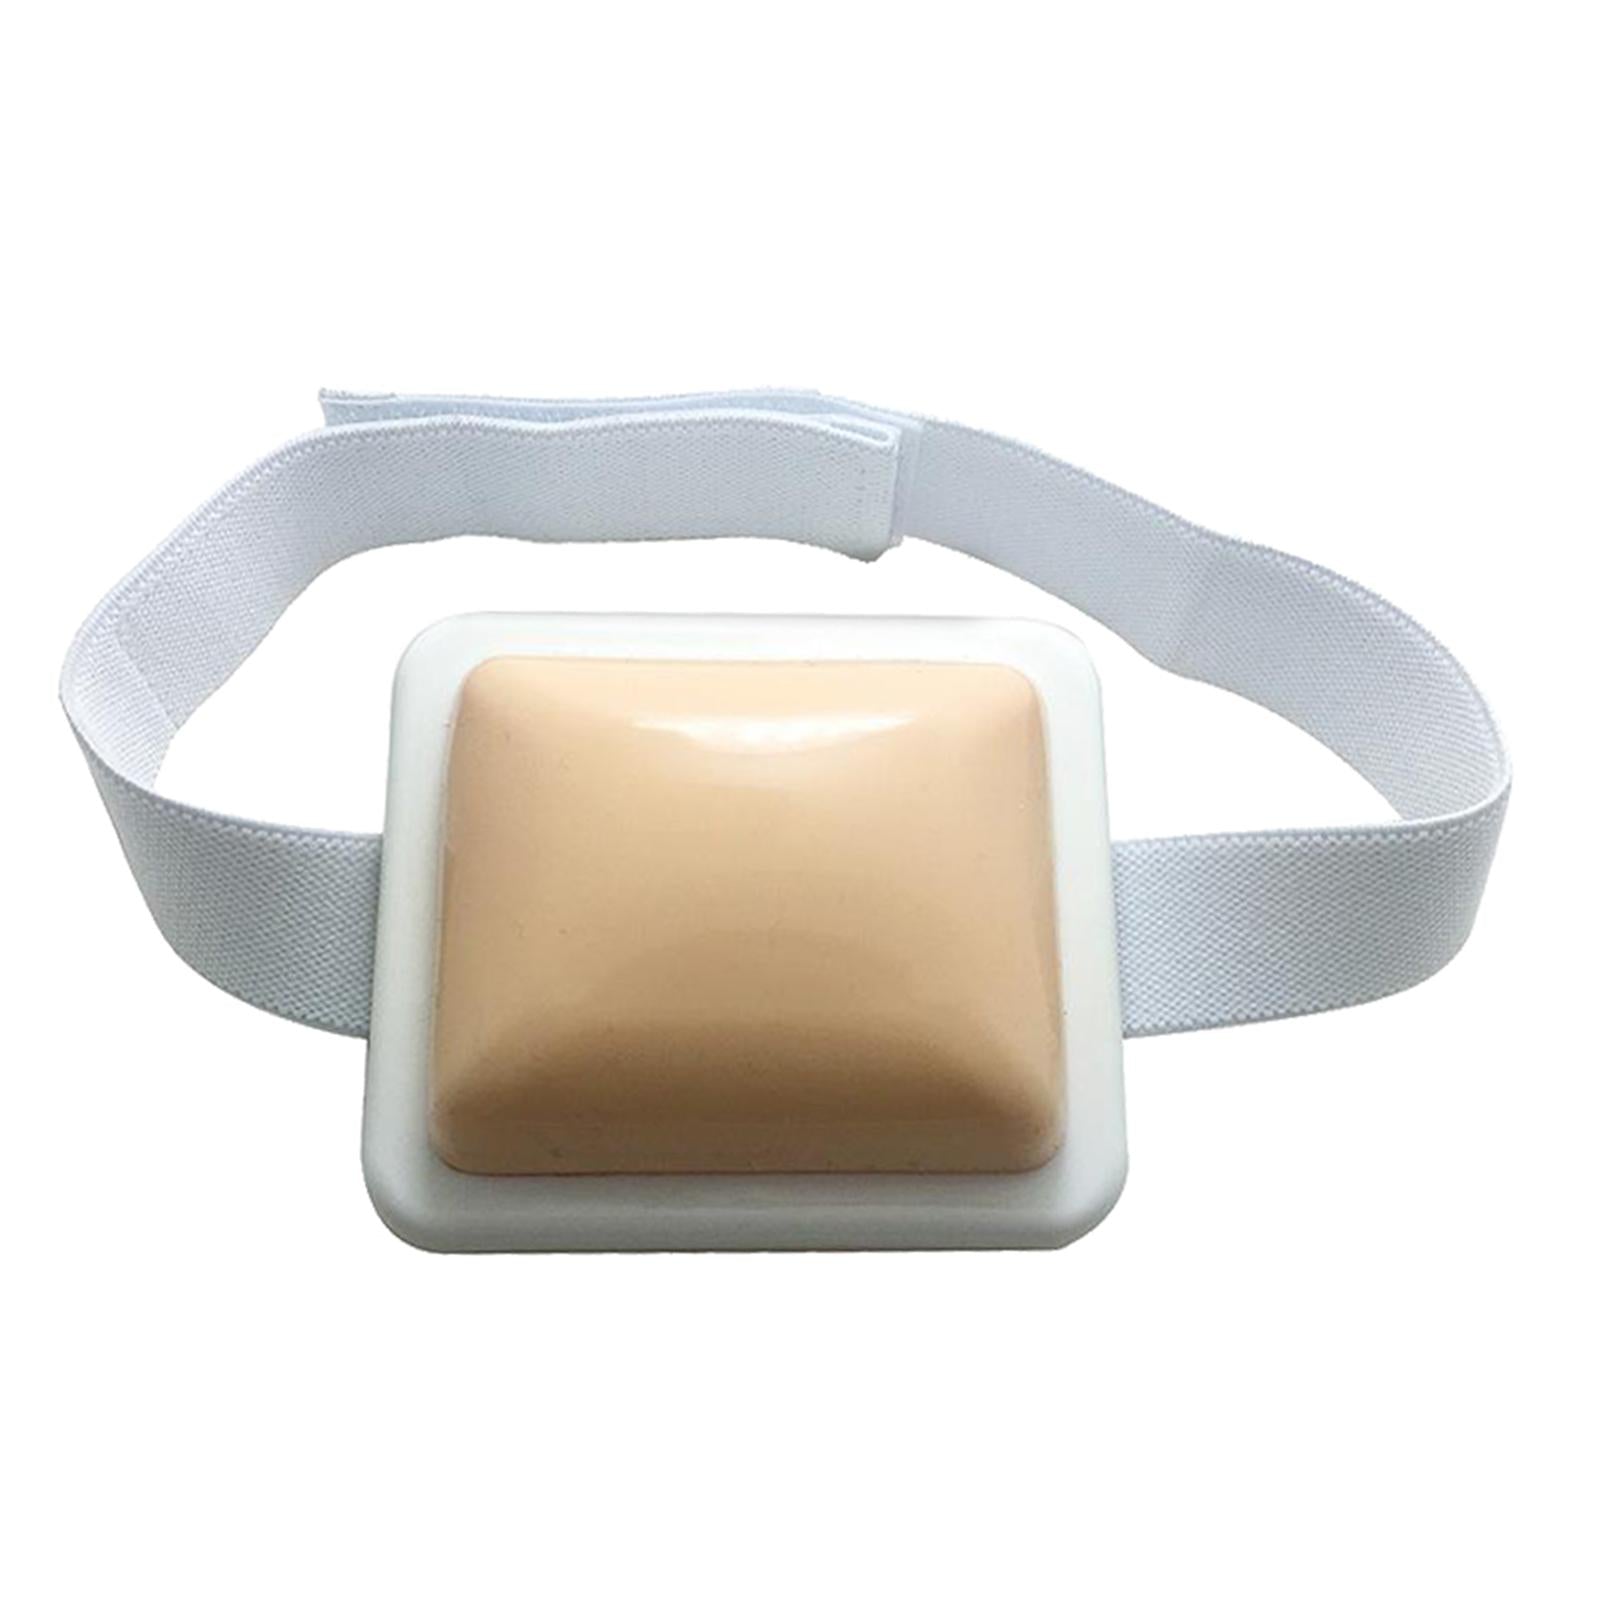 Injection Training Pad Tool for Nurse Students Professional Wearable Design